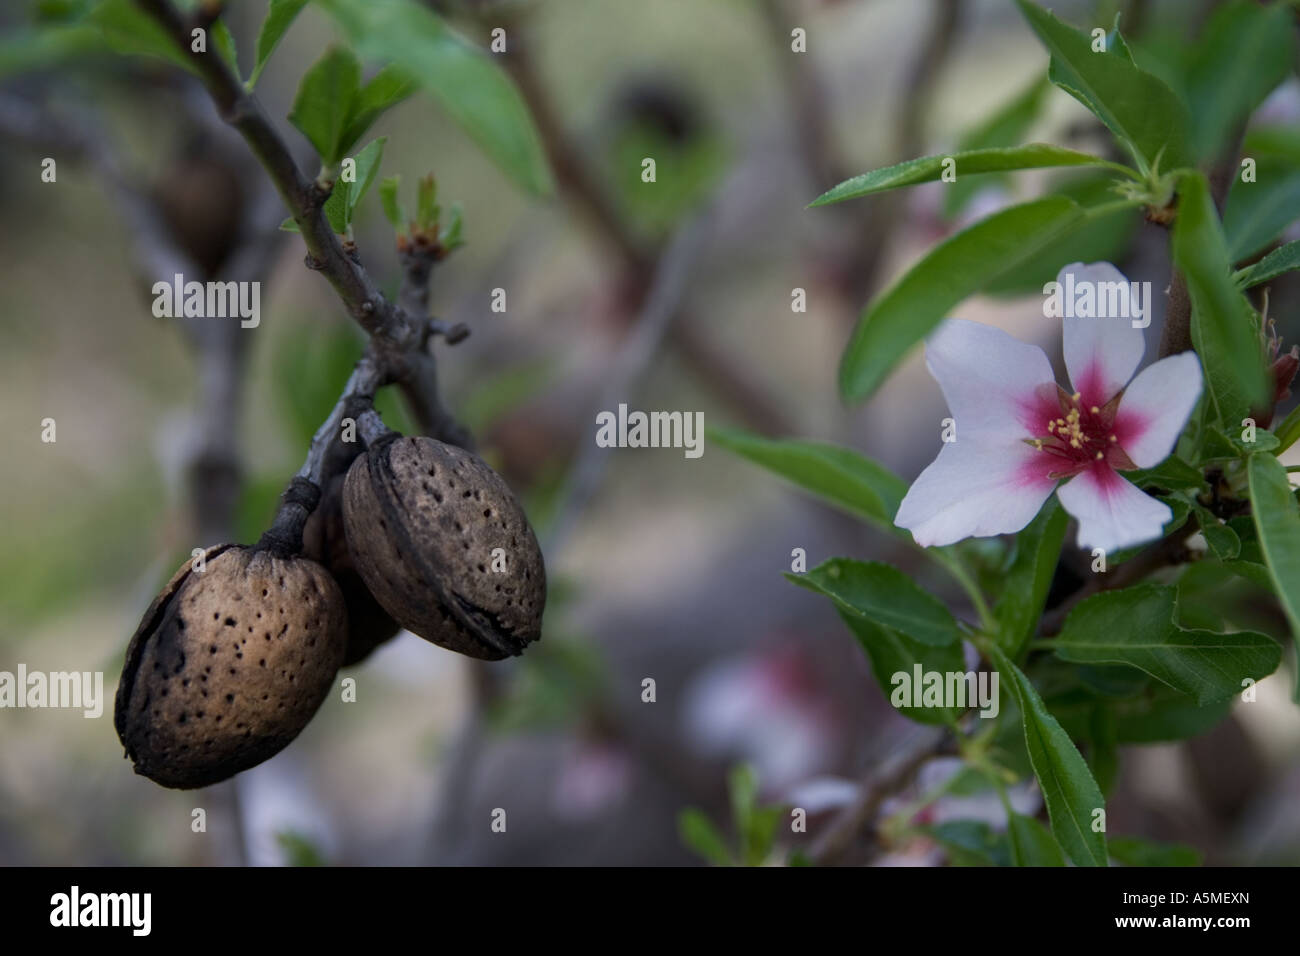 Close view of almonds on a tree and also their flower. Stock Photo